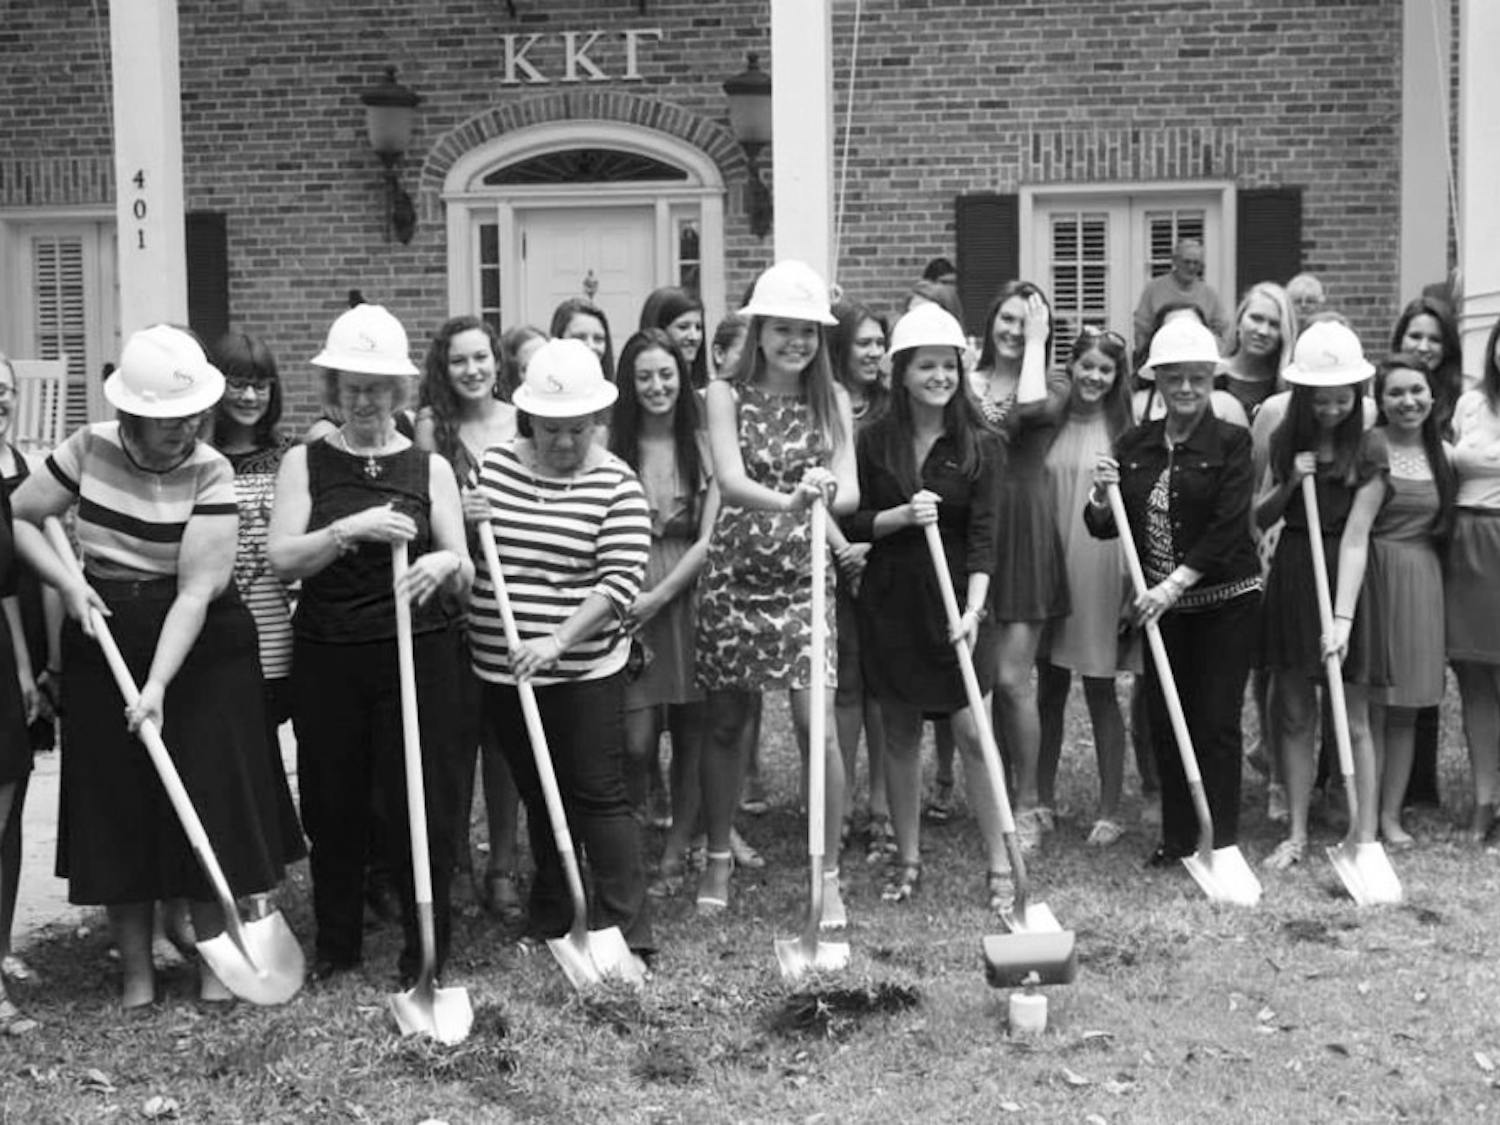 Members of Kappa Kappa Gamma break ground on their new house expansion Sunday afternoon. The renovations, which include an additional laundry room, are scheduled to be completed by Fall. 